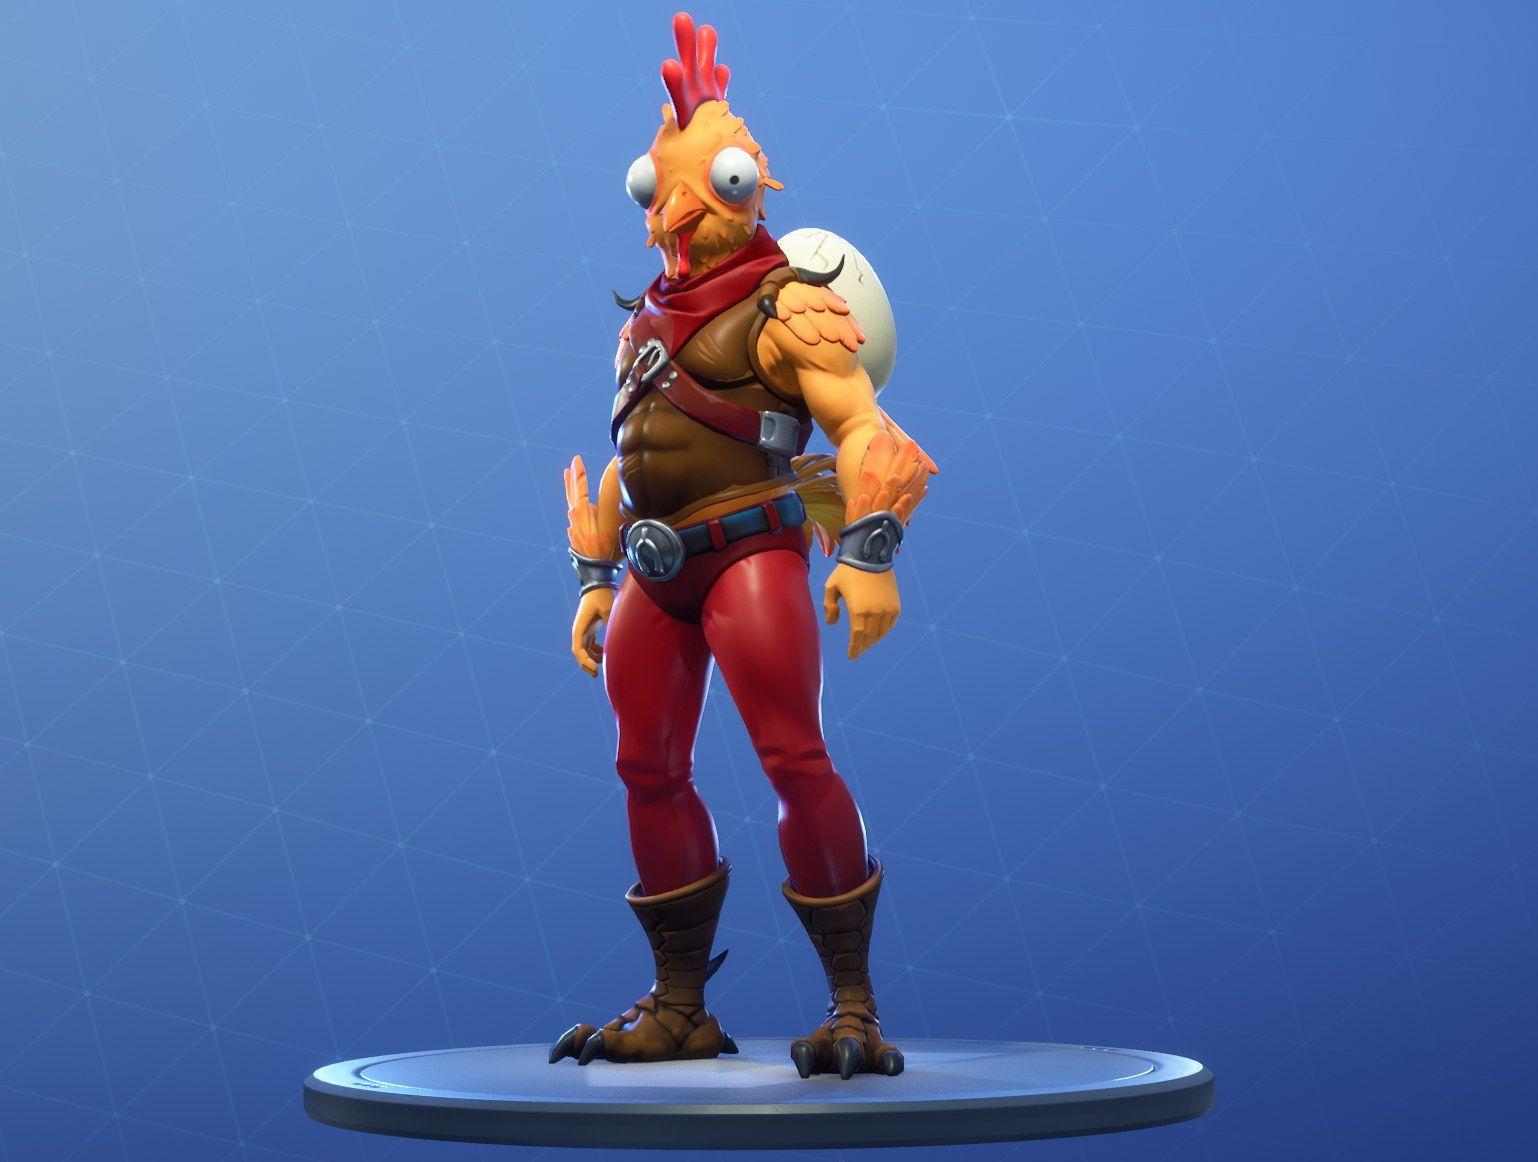 Fortnite has made an 8 year old's chicken dream come true